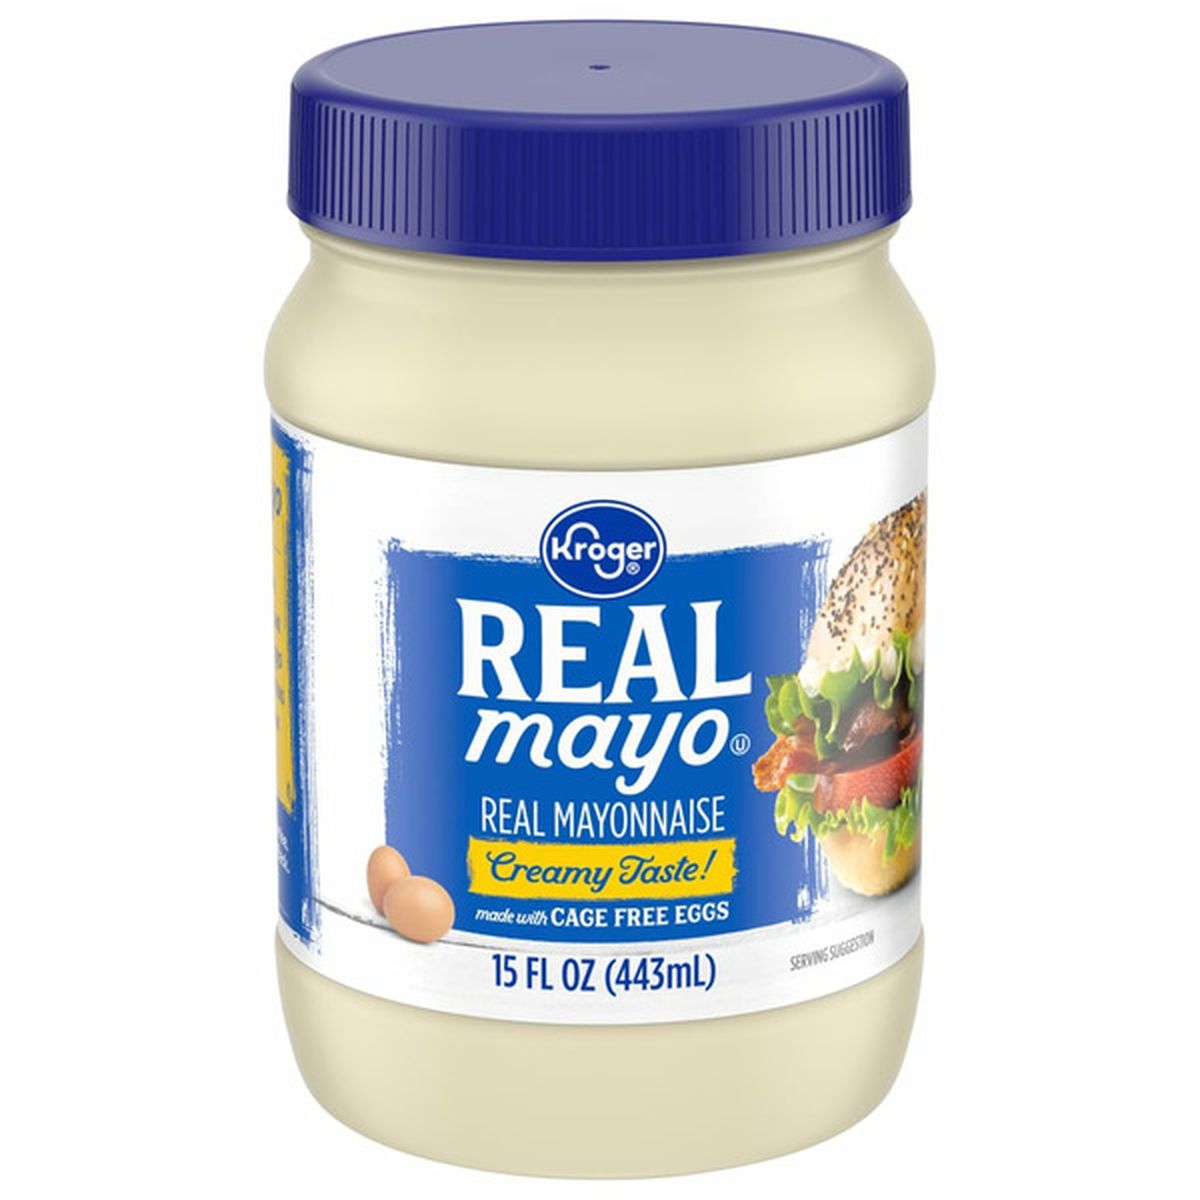 Kroger Real Mayo (15 fl oz) Delivery or Pickup Near Me - Instacart